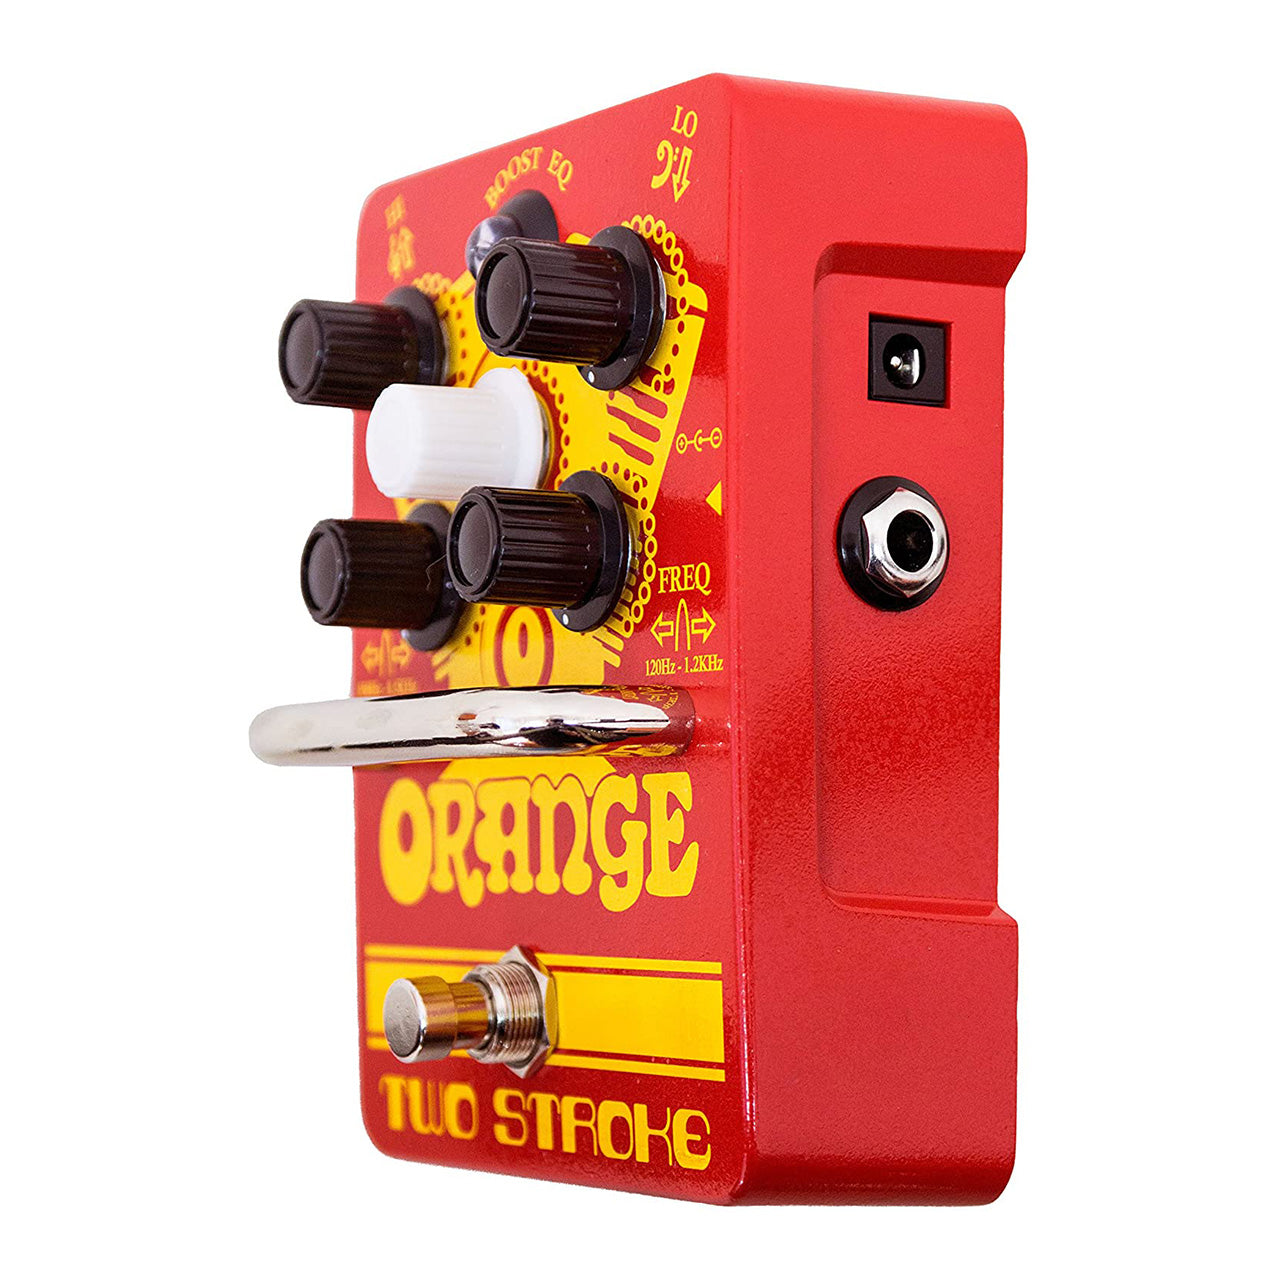 Orange Amps Two Stroke Guitar Effects Pedal with Internal Charge Pump for Electric Guitars